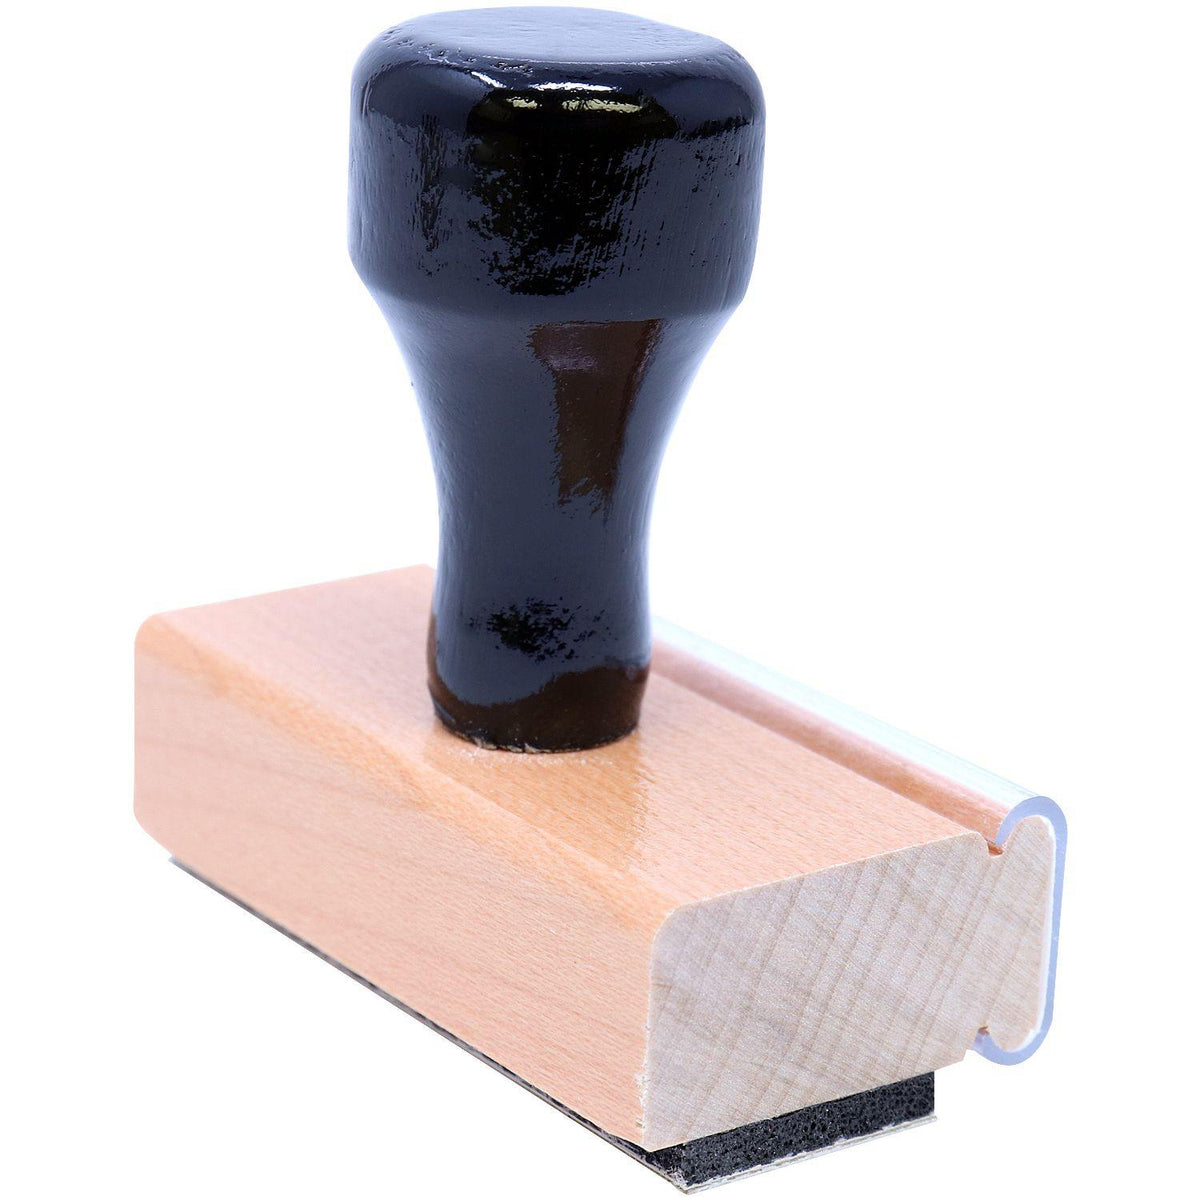 Narrow Void Rubber Stamp - Engineer Seal Stamps - Brand_Acorn, Impression Size_Small, Stamp Type_Regular Stamp, Type of Use_Office